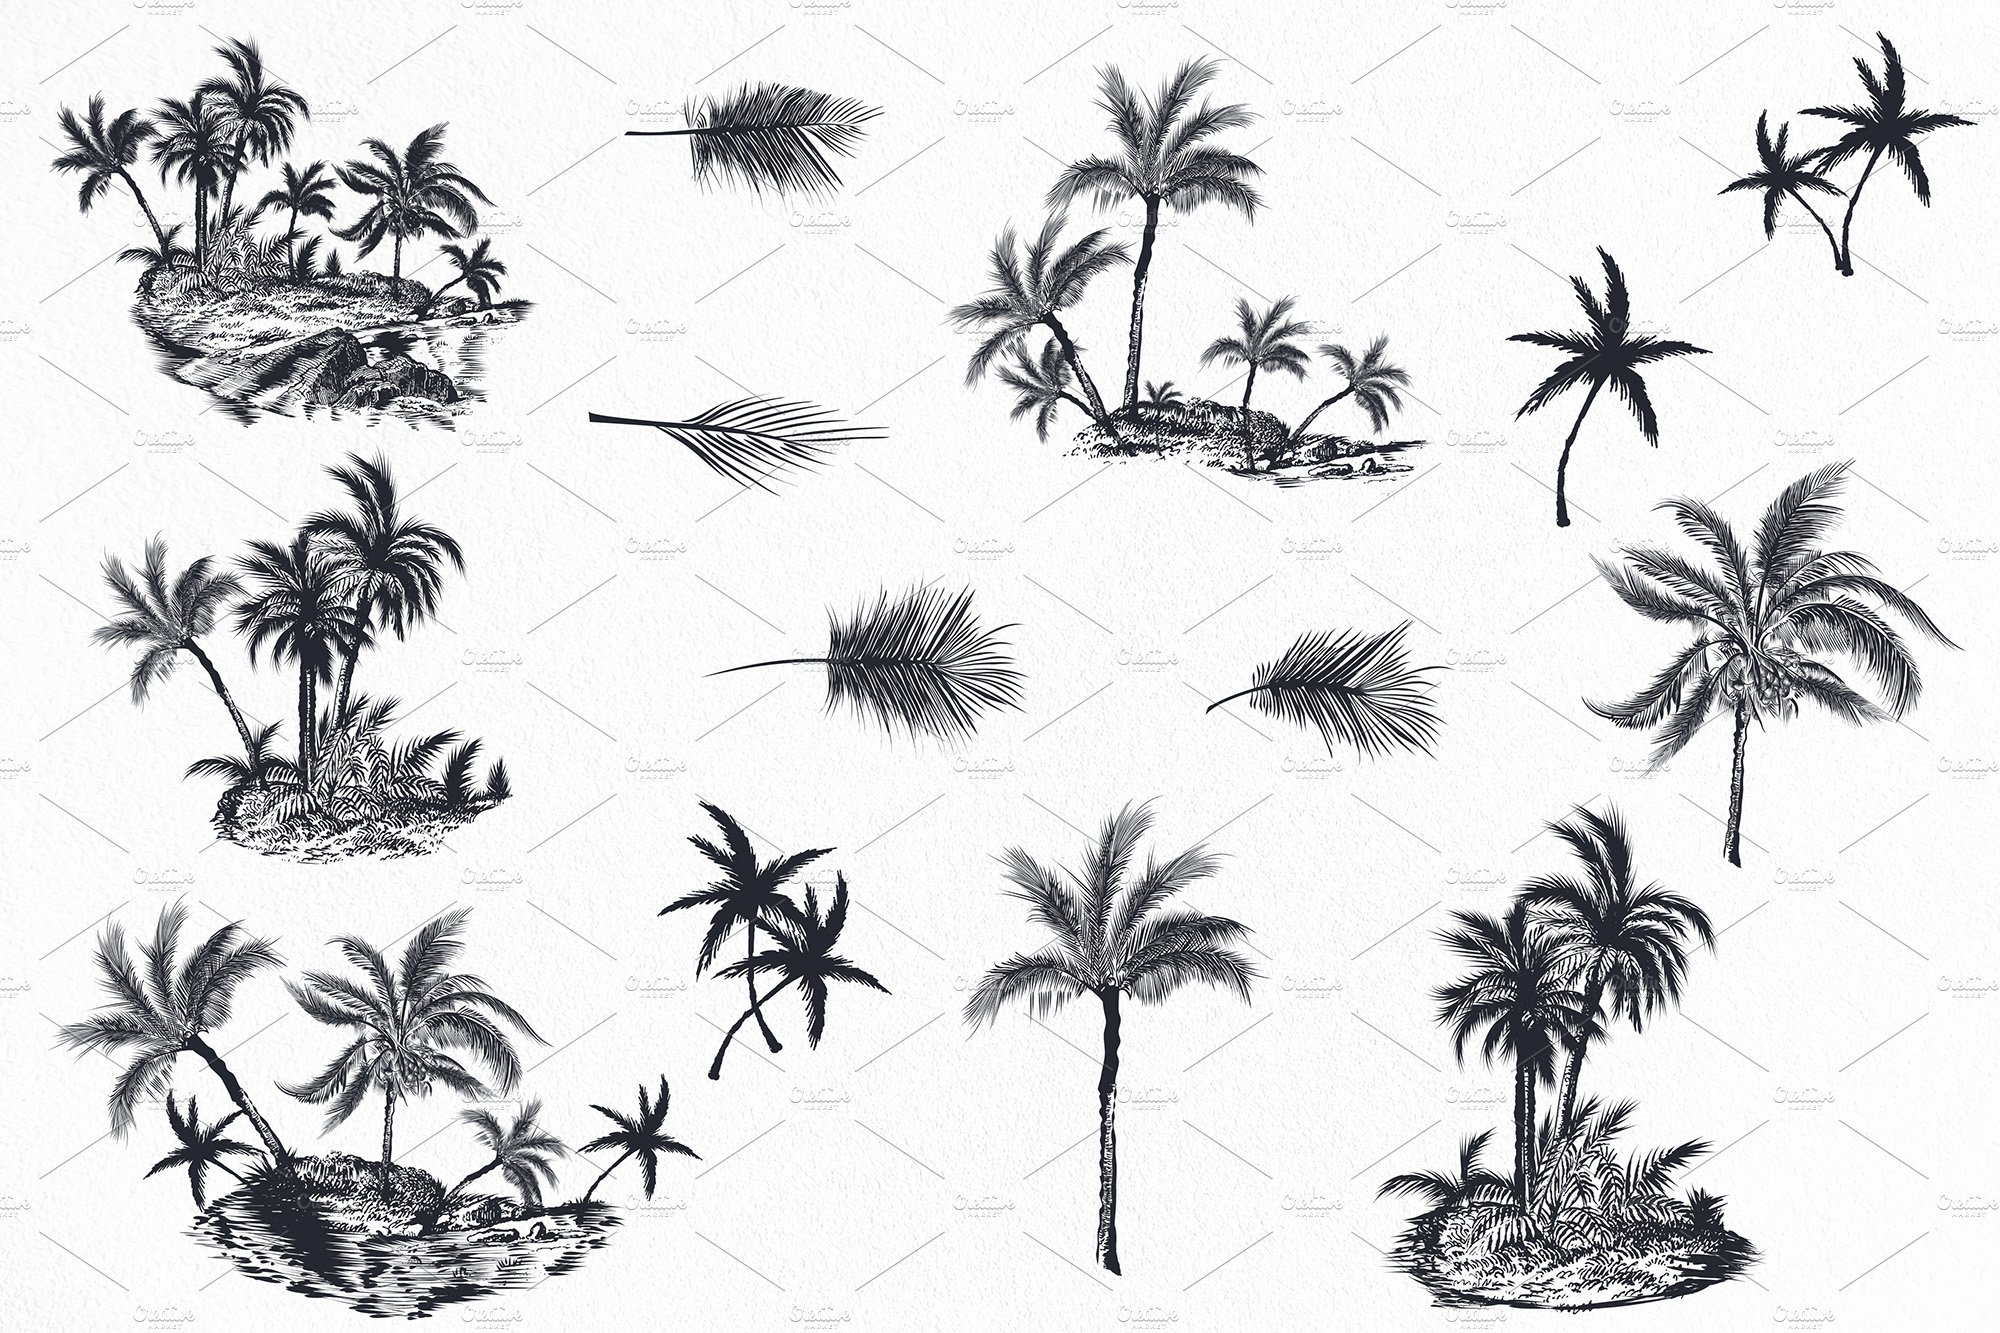 Black palms collection.